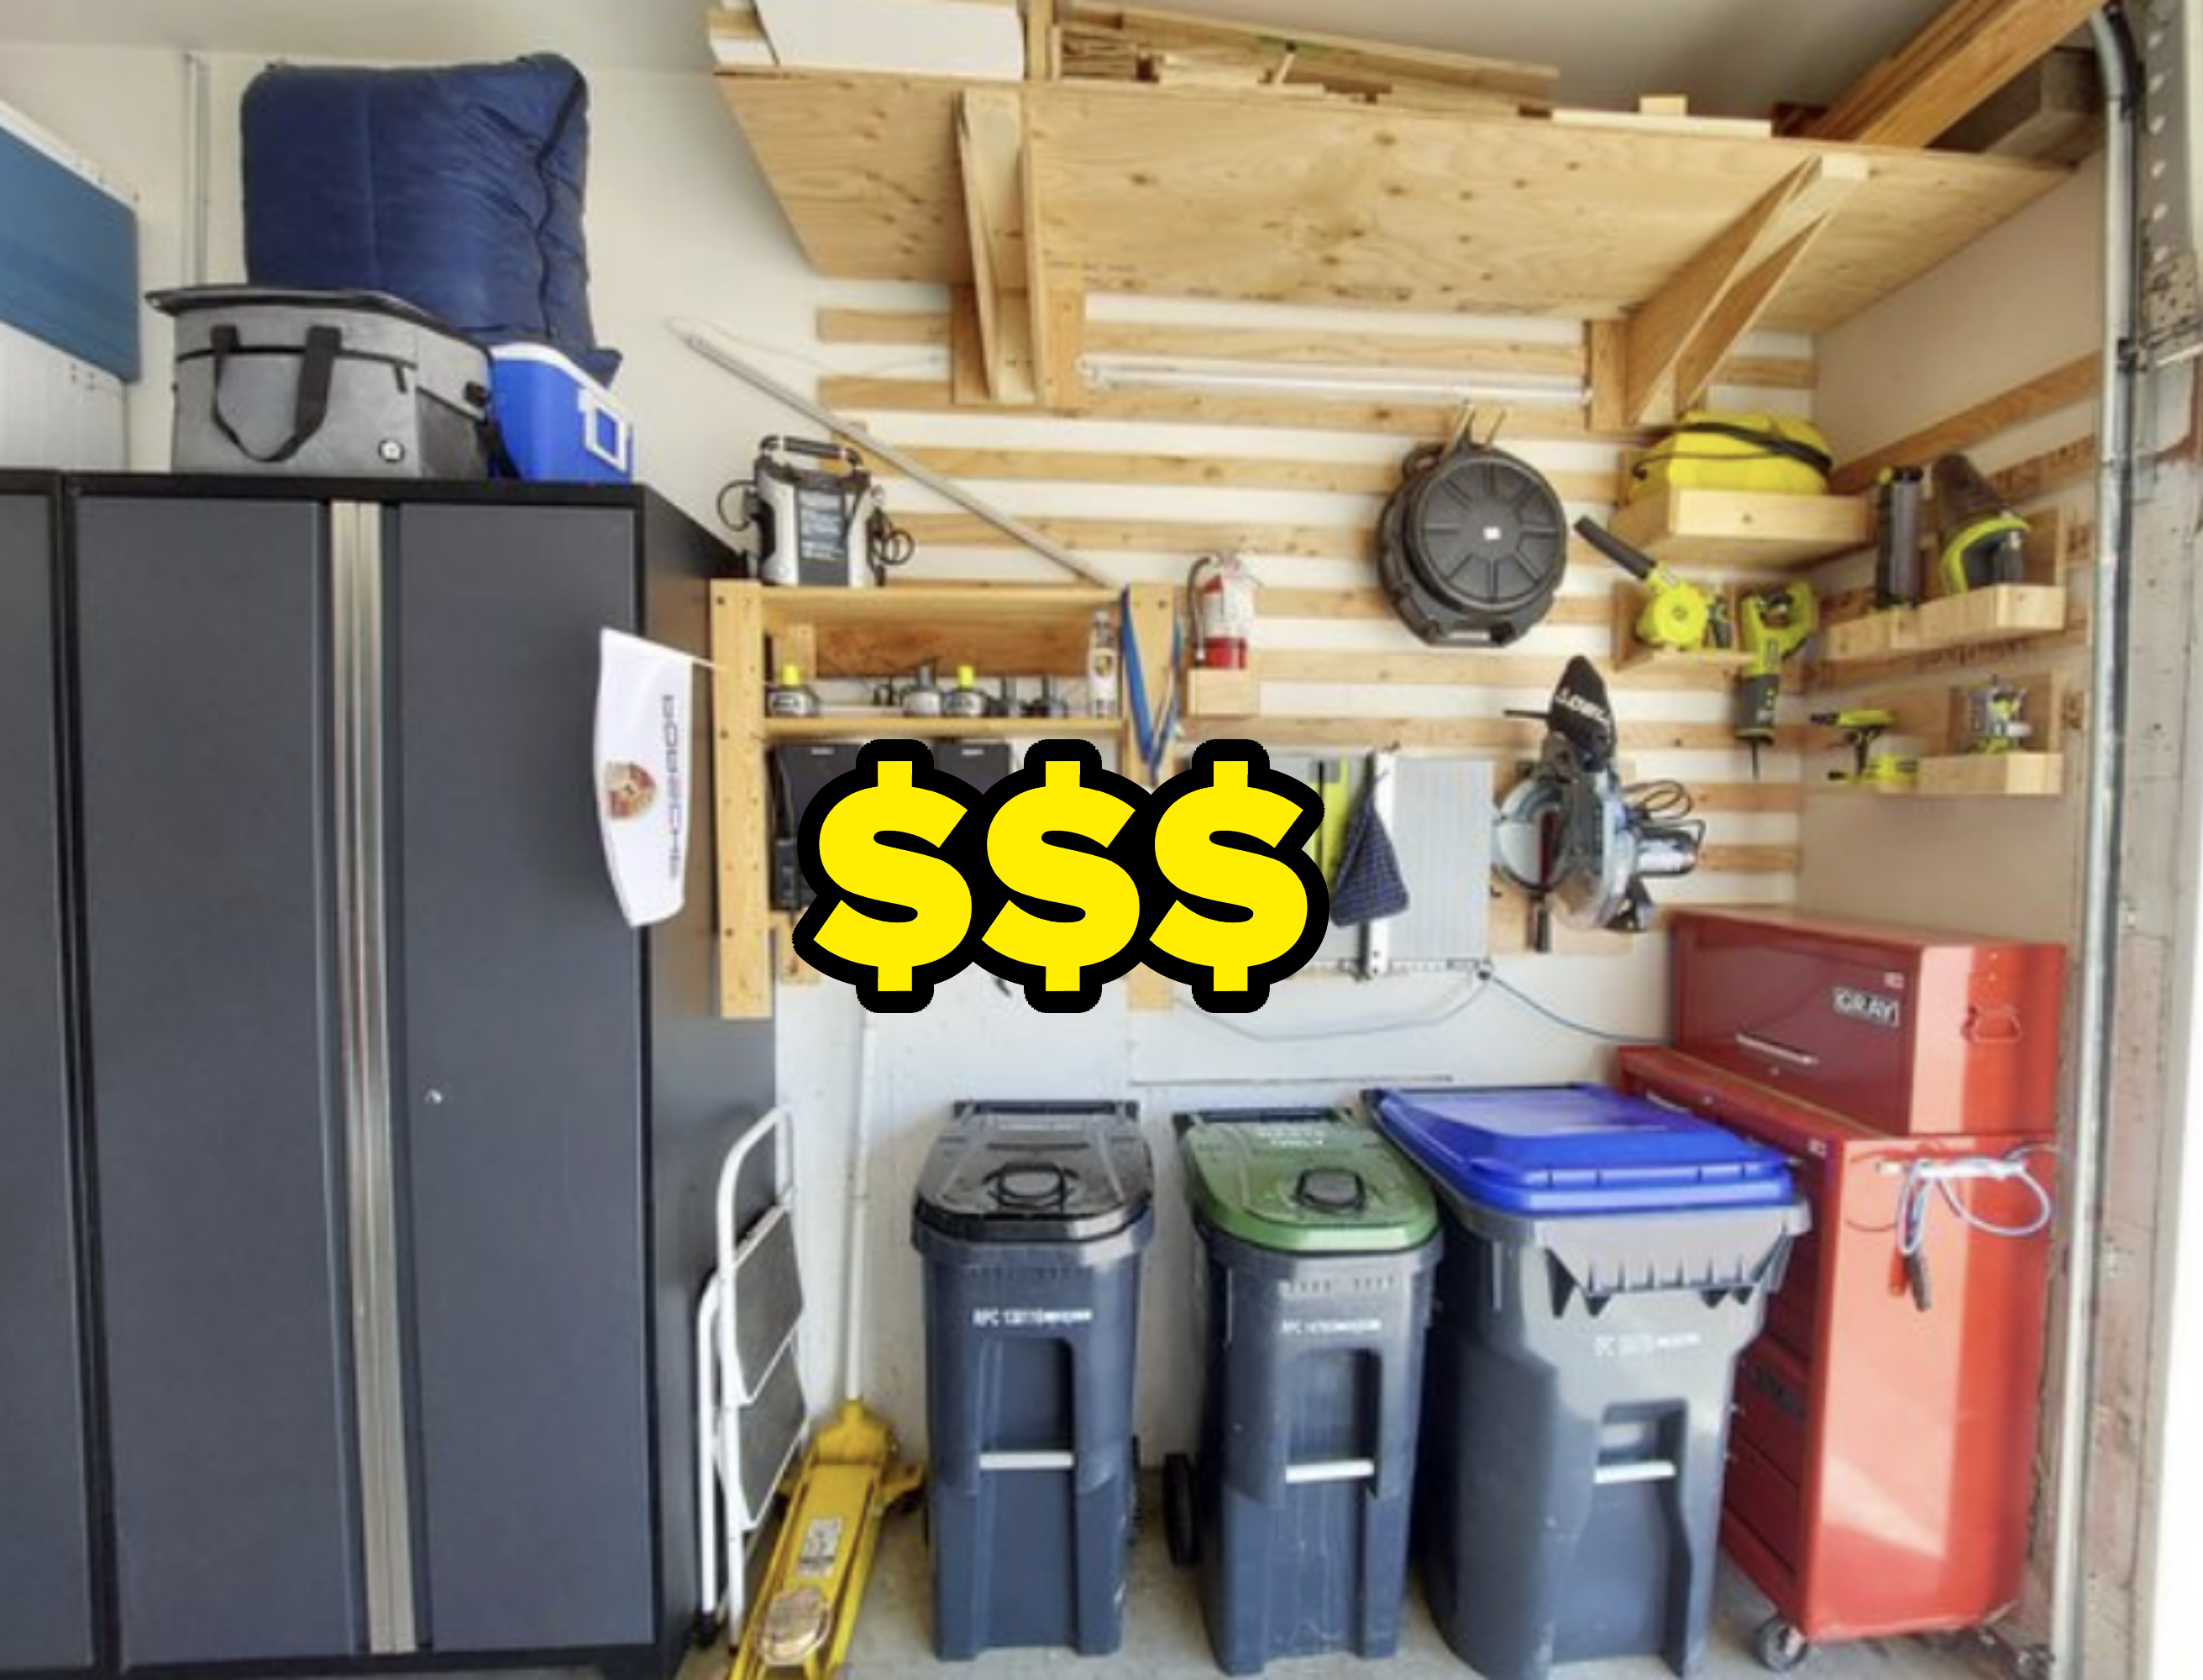 A garage wall that has garbage bins, power tools, and storage